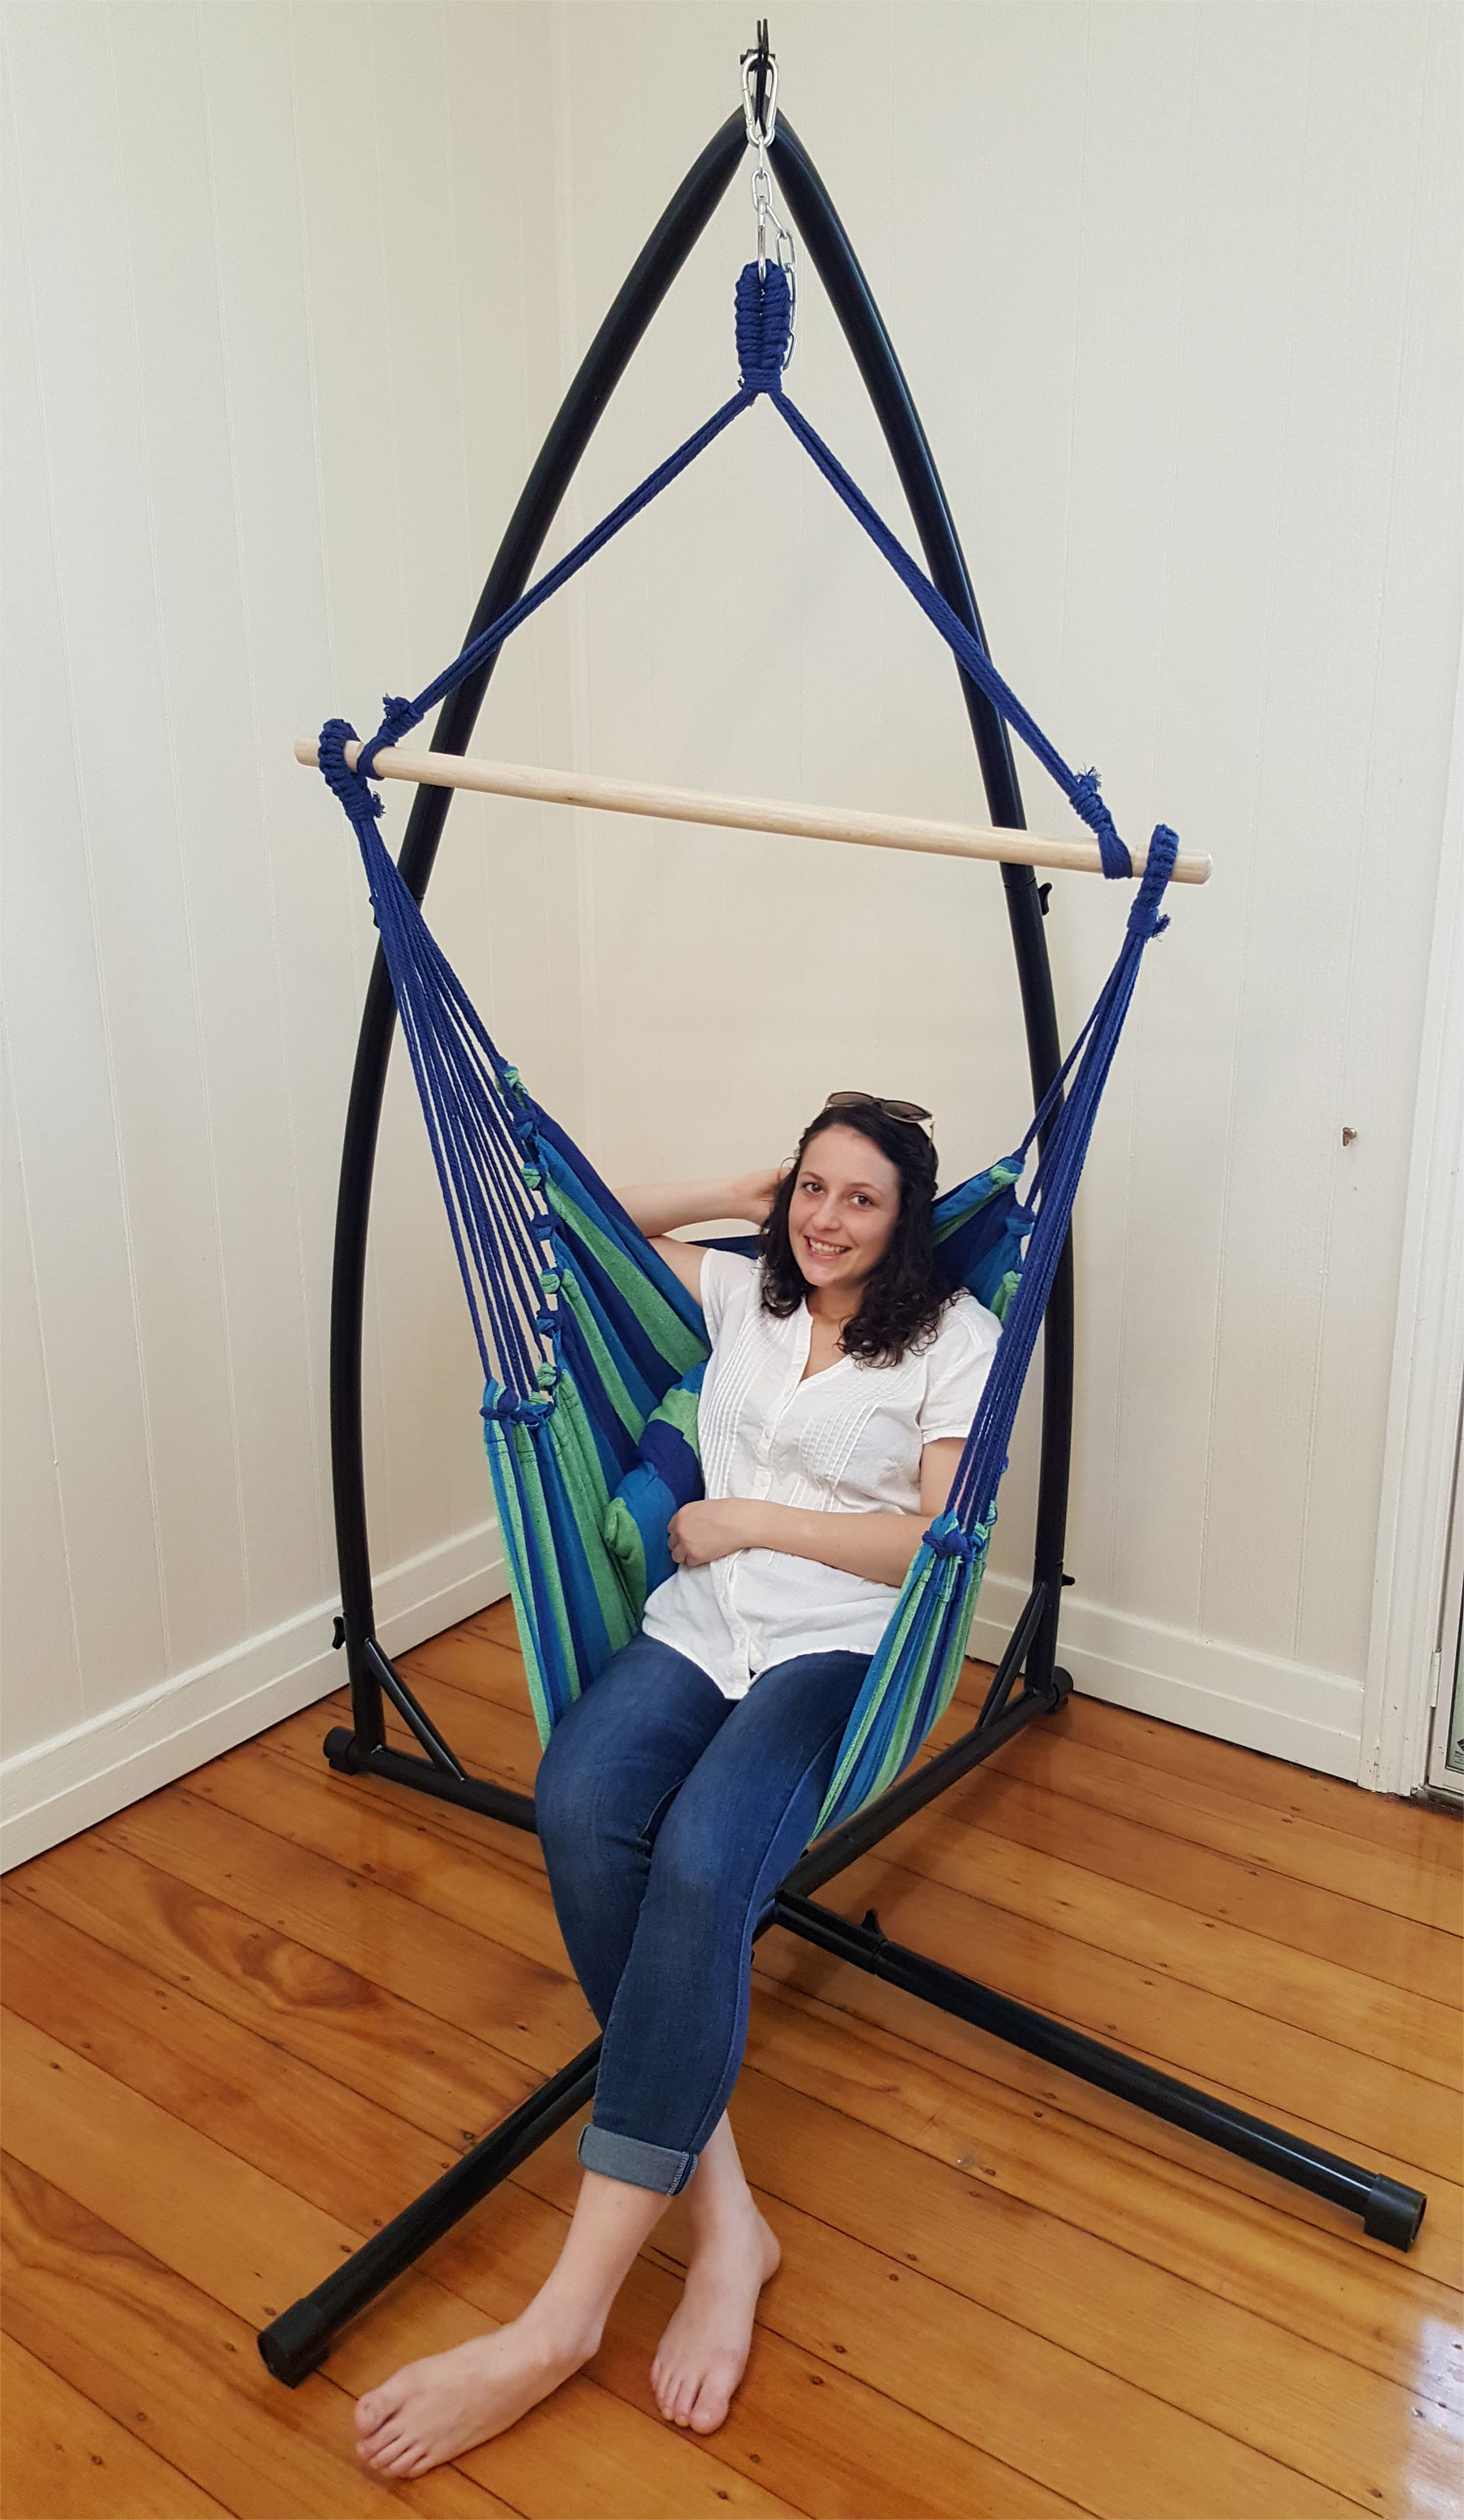 Blue Padded Hammock Chair With Pillows With Stand - Heavenly Hammocks